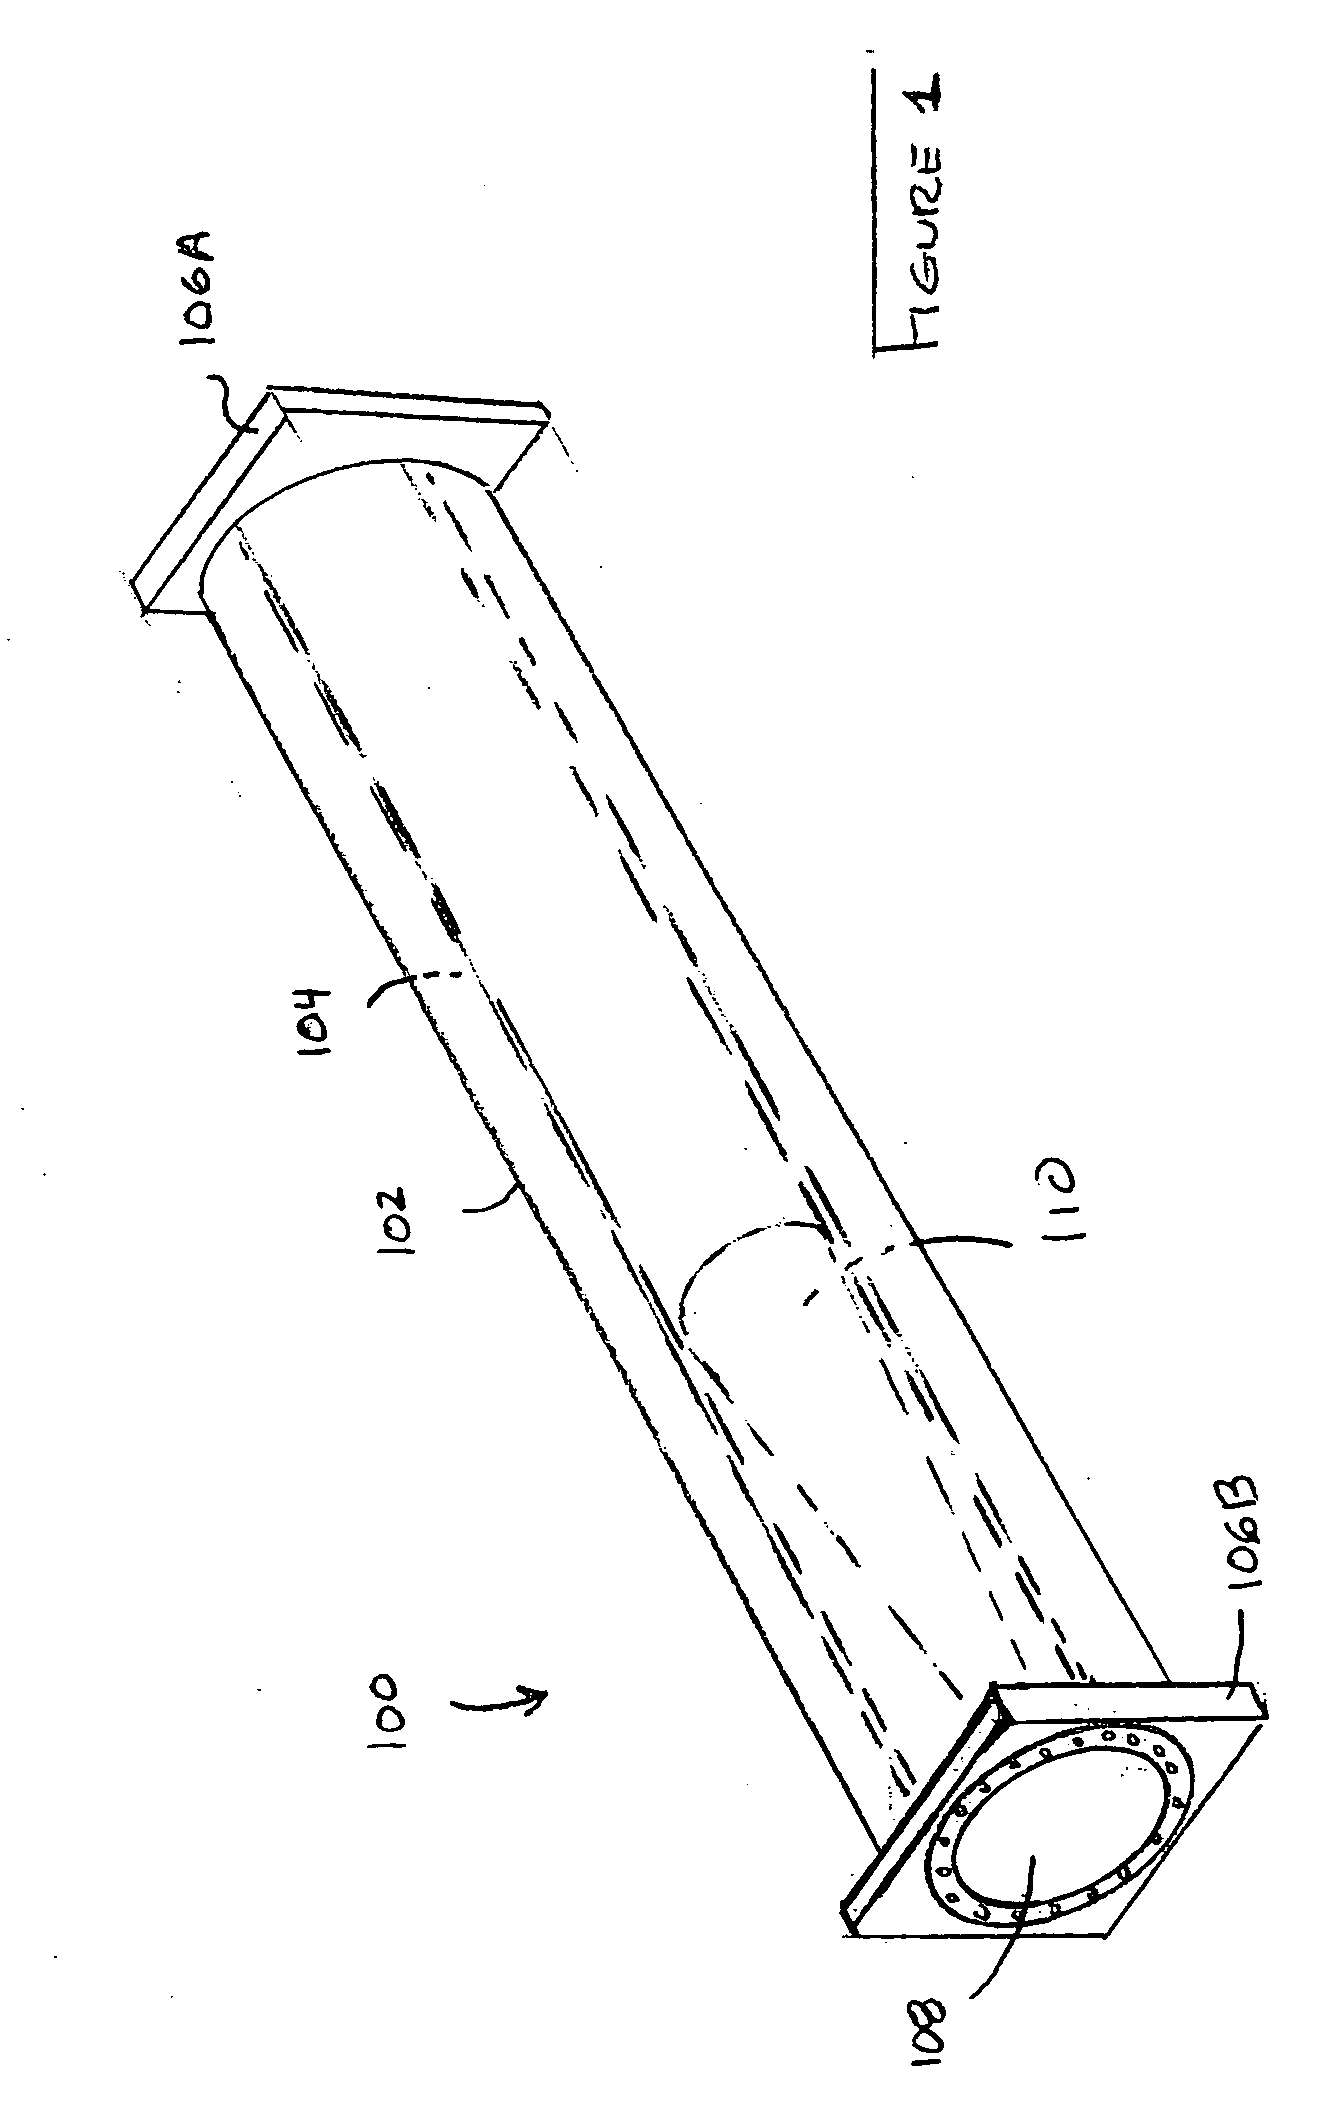 Article comprising a composite cover